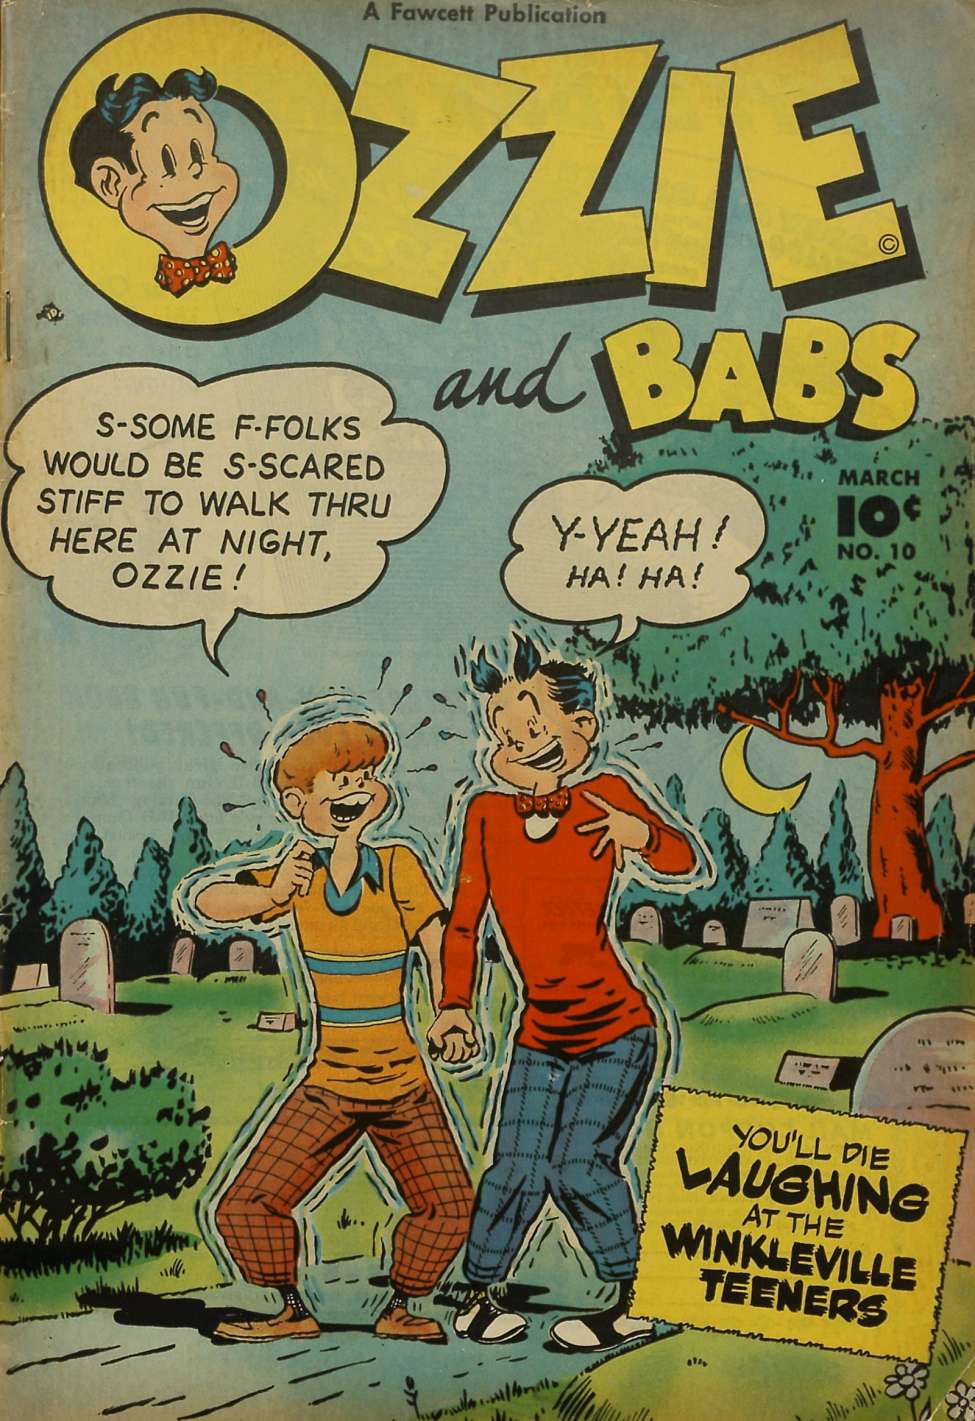 Comic Book Cover For Ozzie and Babs 10 - Version 2